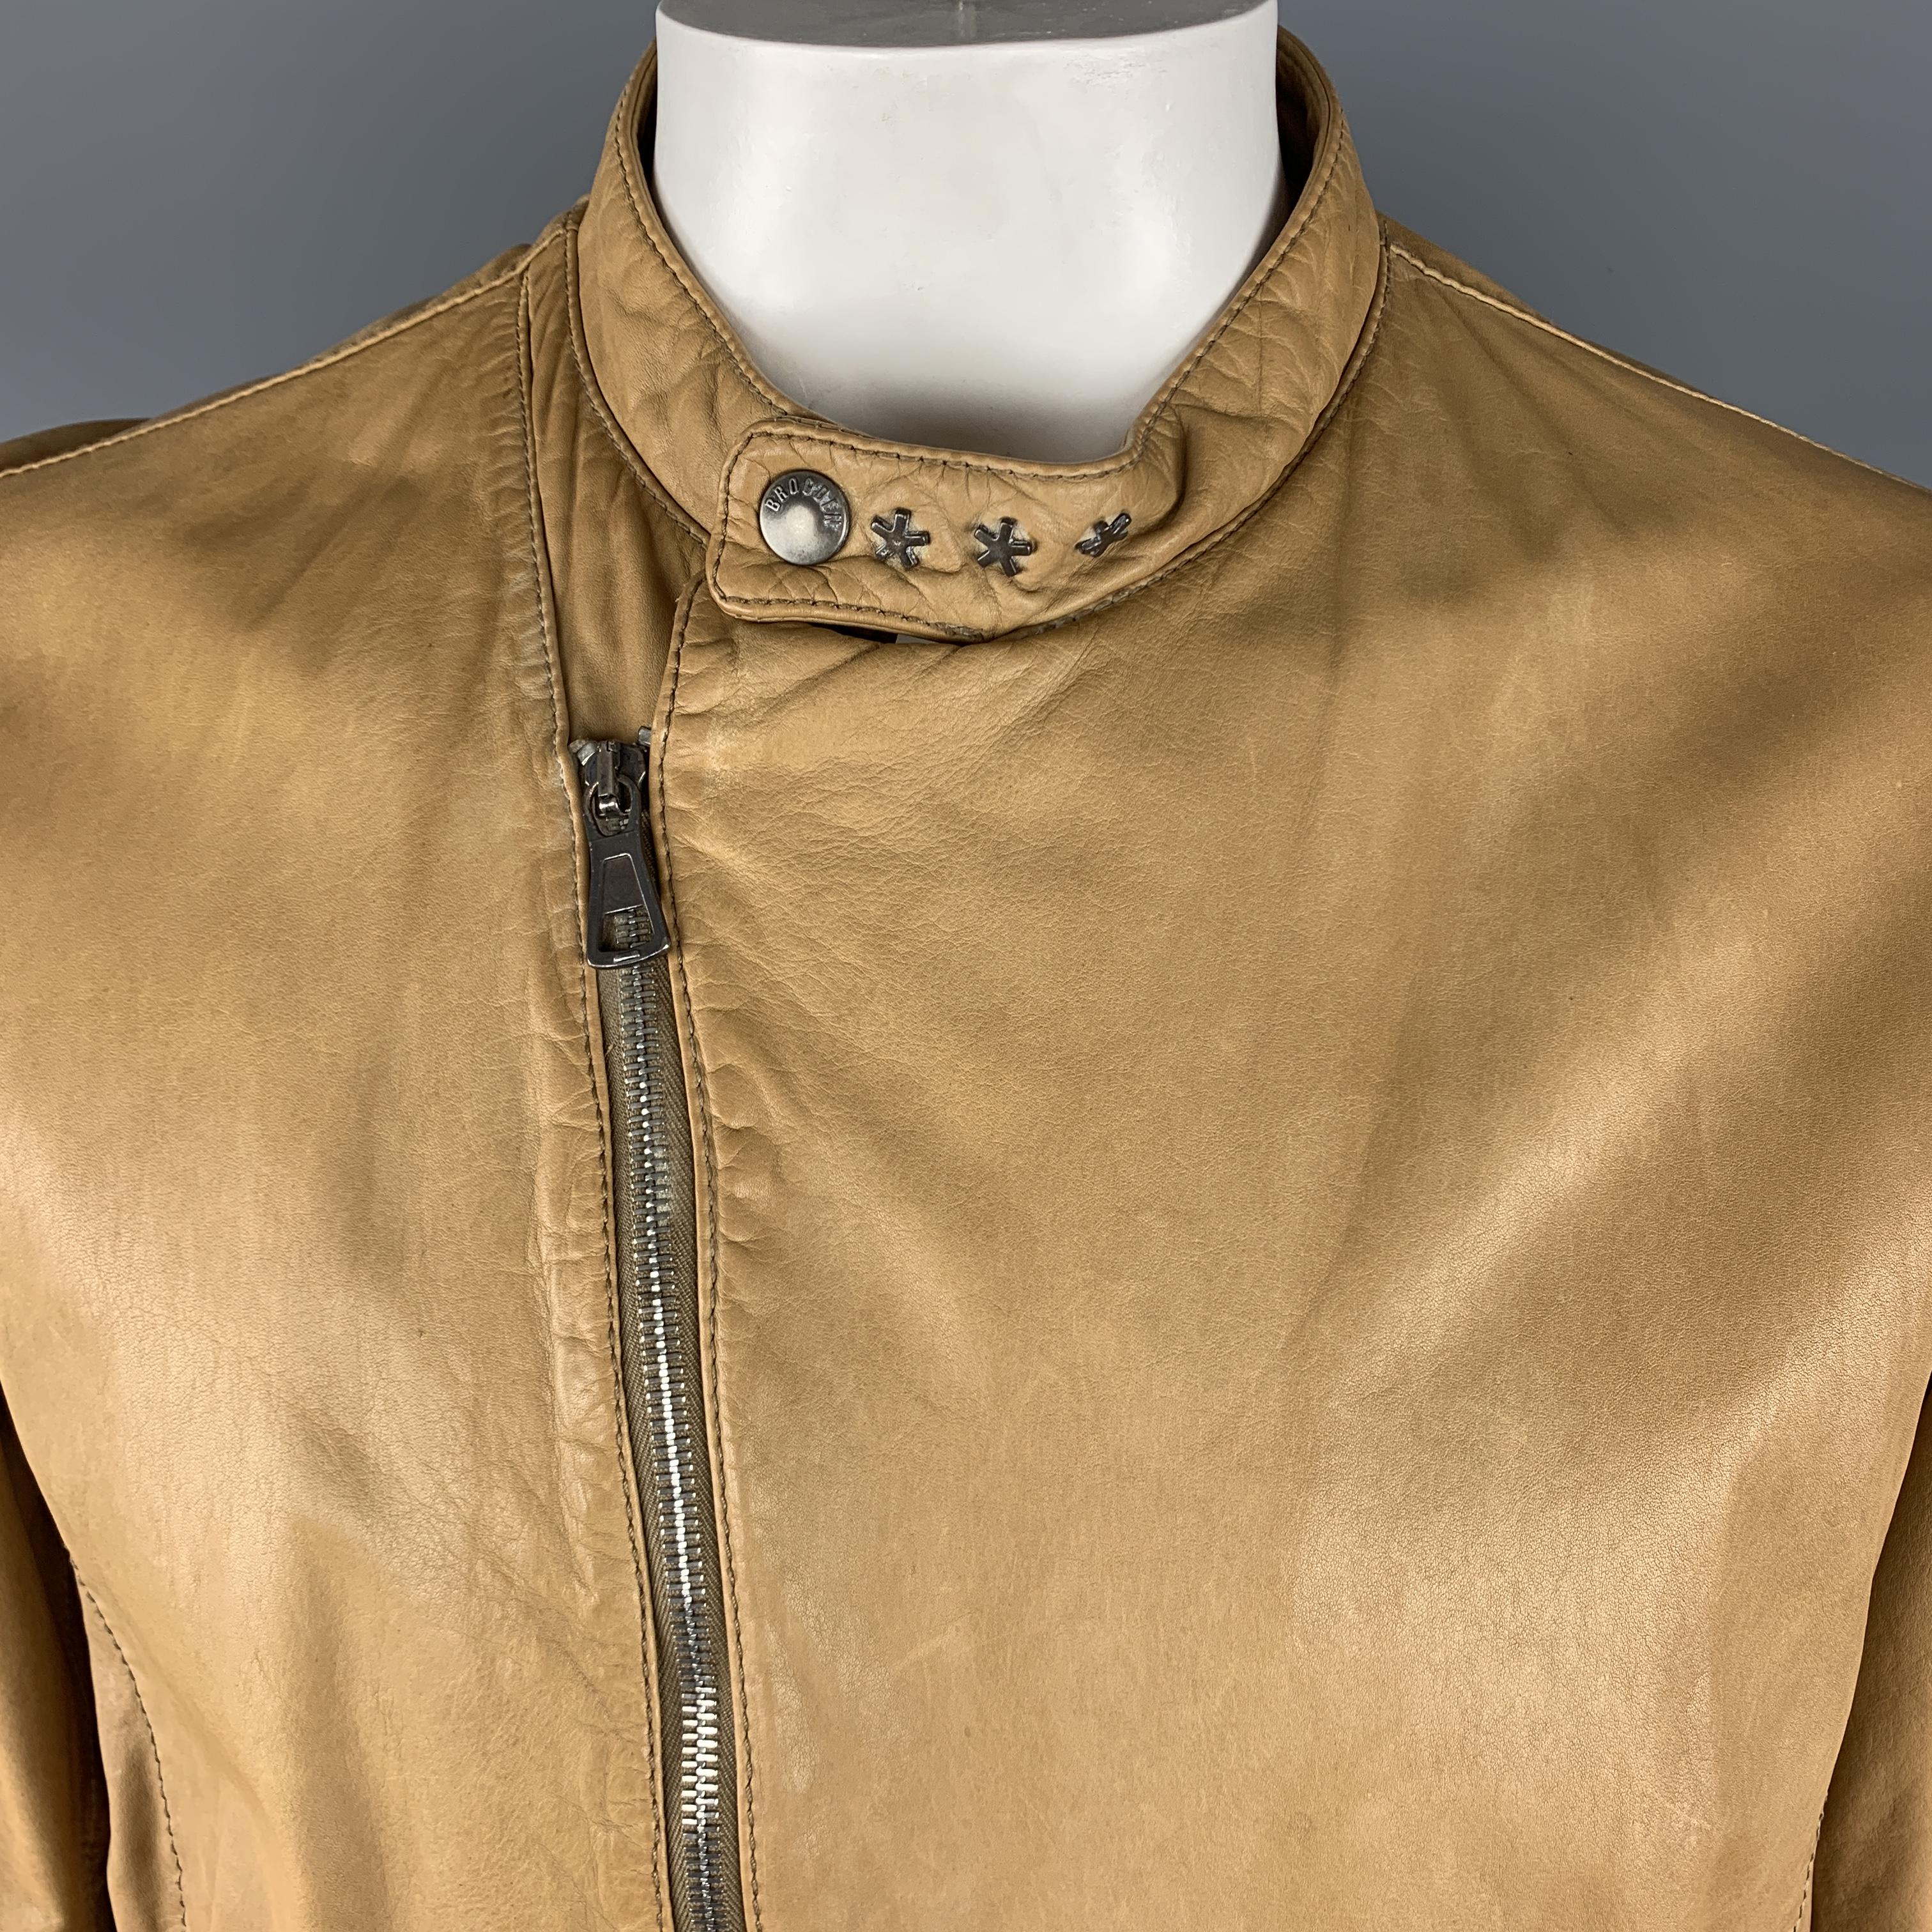 BROGDEN Distressed Motorcycle Jacket comes in a tan tone in a leather material, with zip at pockets and cuffs, and silver tone metal hardware details.  As Is.
 
Good Pre-Owned Condition.
Marked: M
 
Measurements:
 
Shoulder: 18 in.
Chest: 50